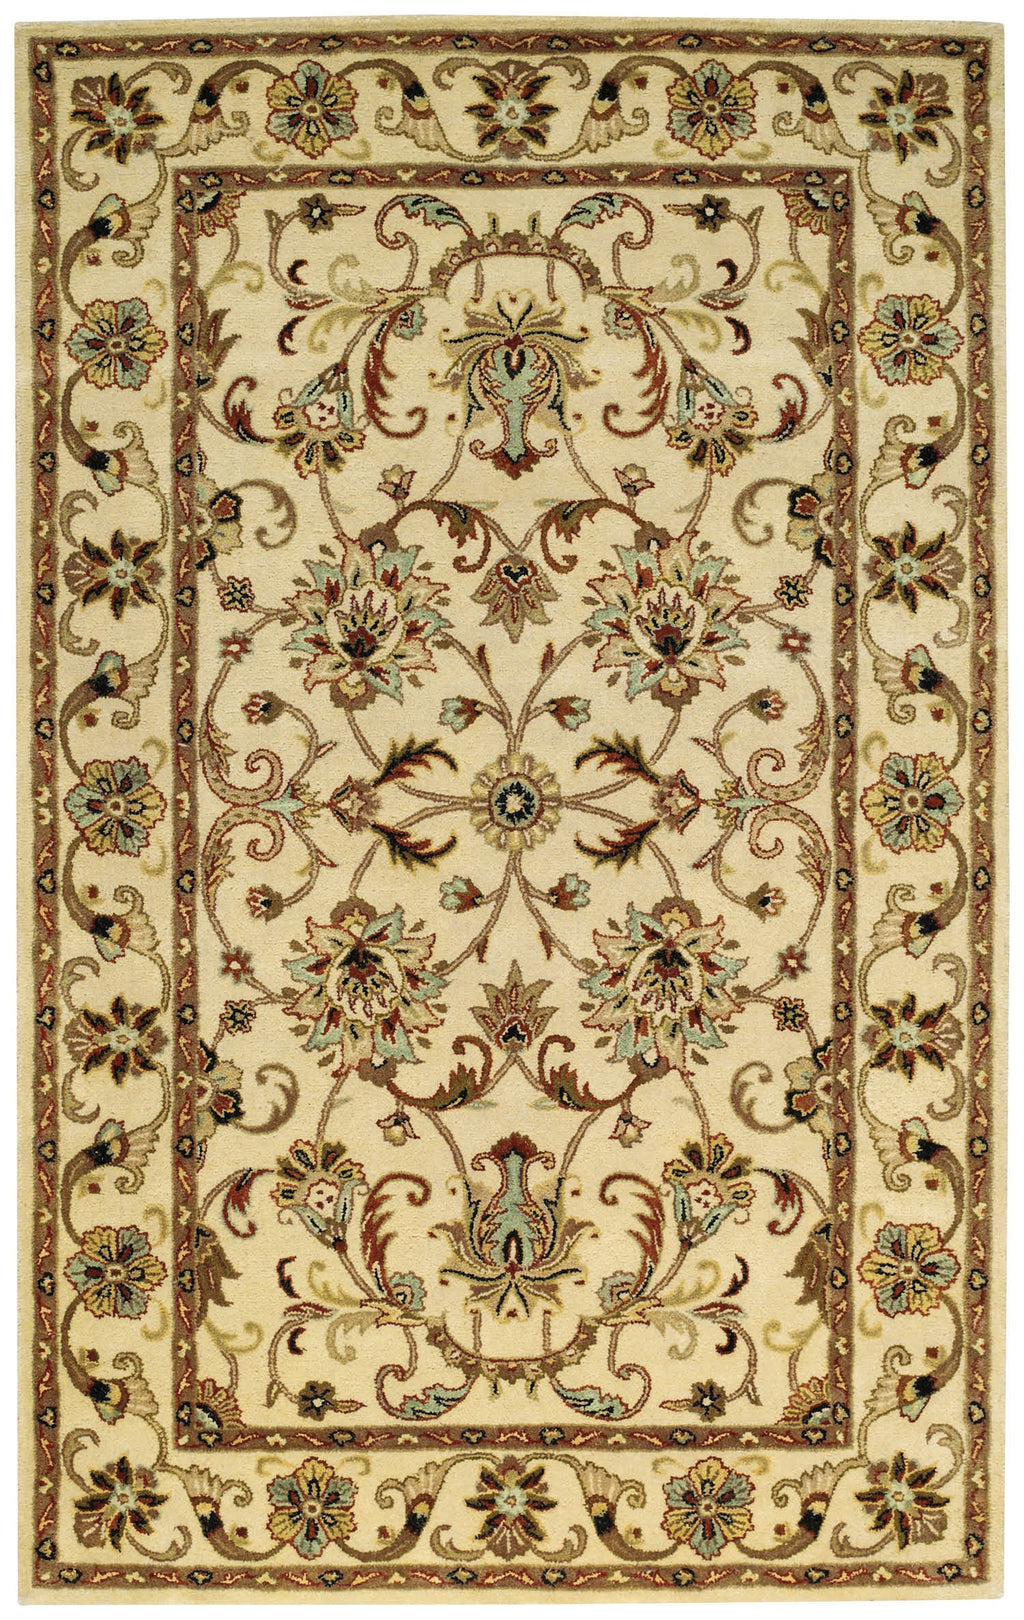 Capel Guilded 9205 Ivory 660 Area Rug main image